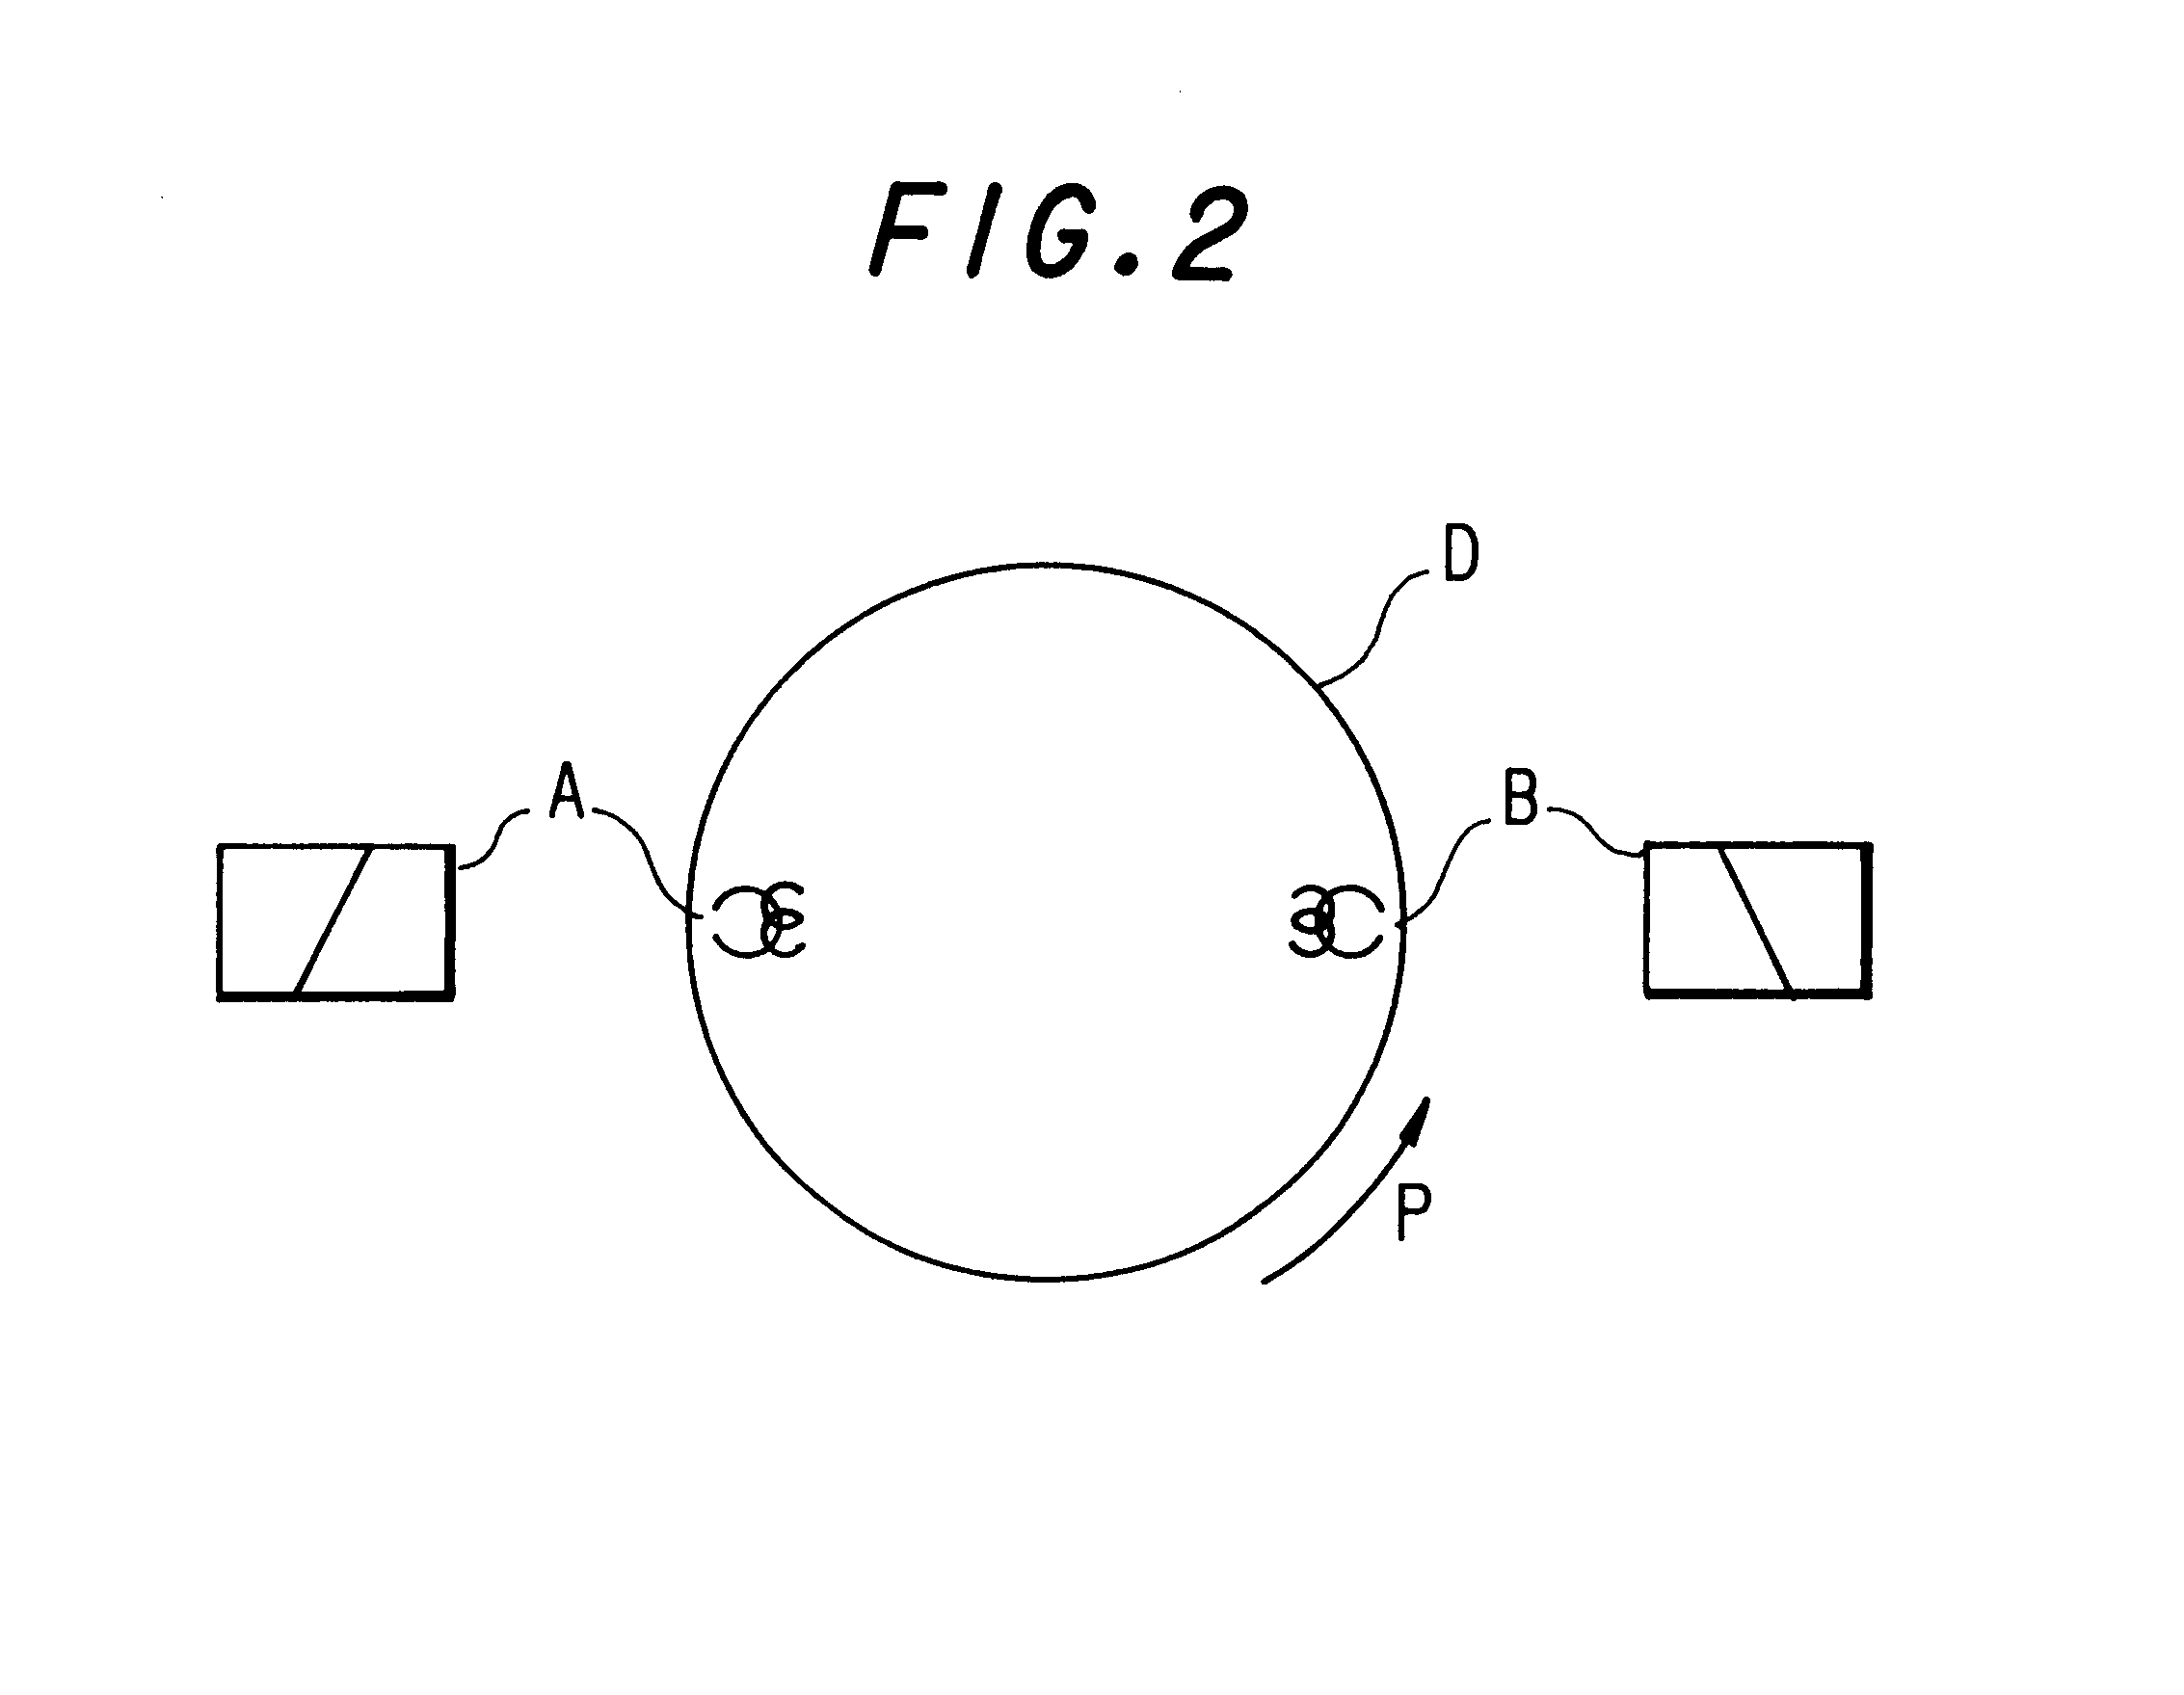 Digital video signal reproducing apparatus with high-speed play mode